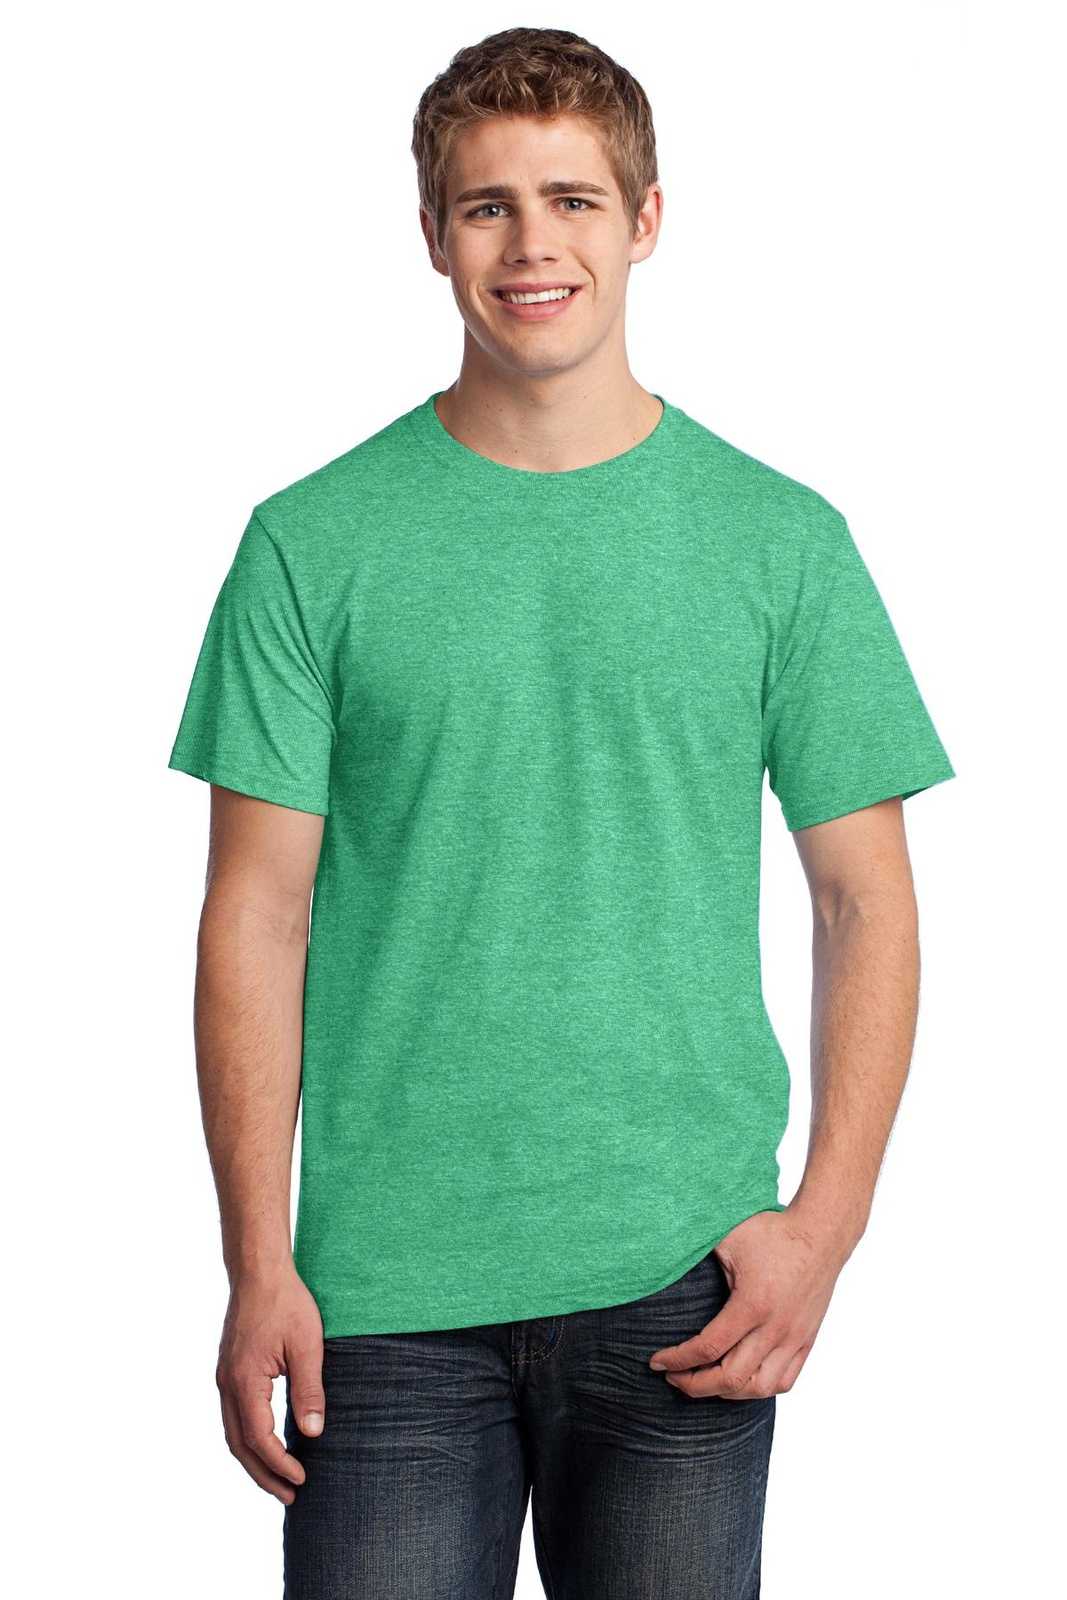 Fruit of the Loom 3930 HD Cotton 100% Cotton T-Shirt - Retro Heather Green - HIT a Double